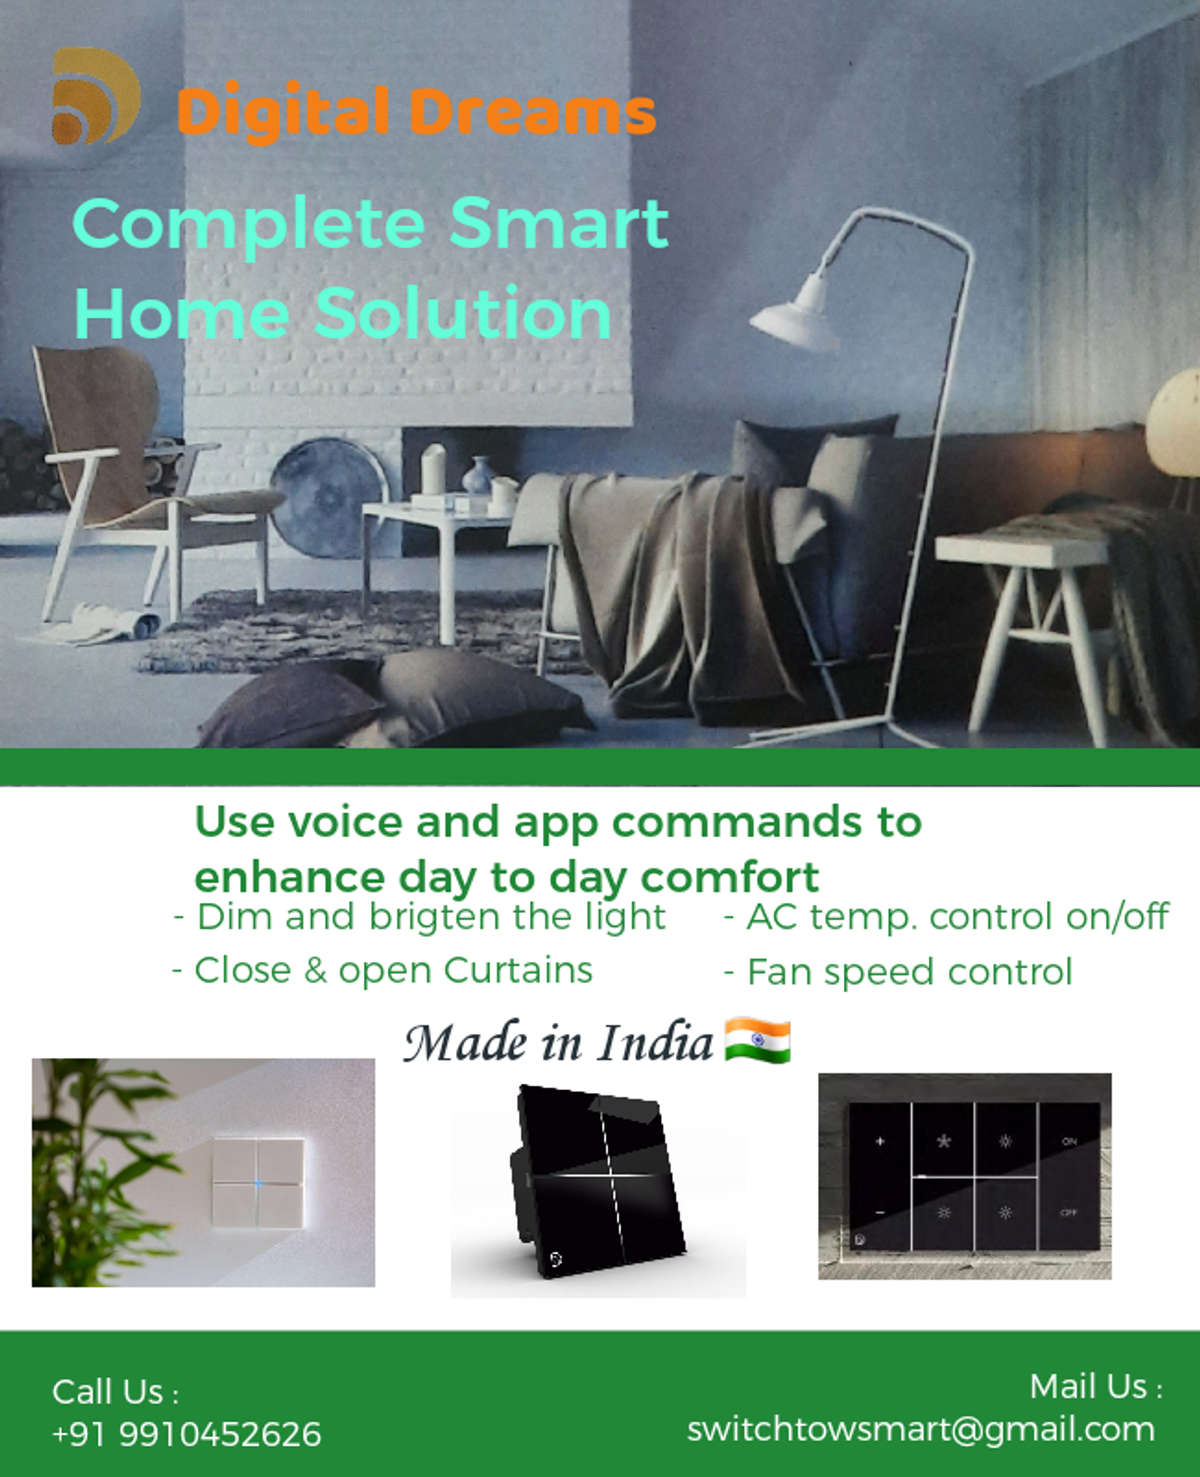 Home Automation/smart Switches made in India No Rewiring No Wall Damage Ready to install as per your comfort 